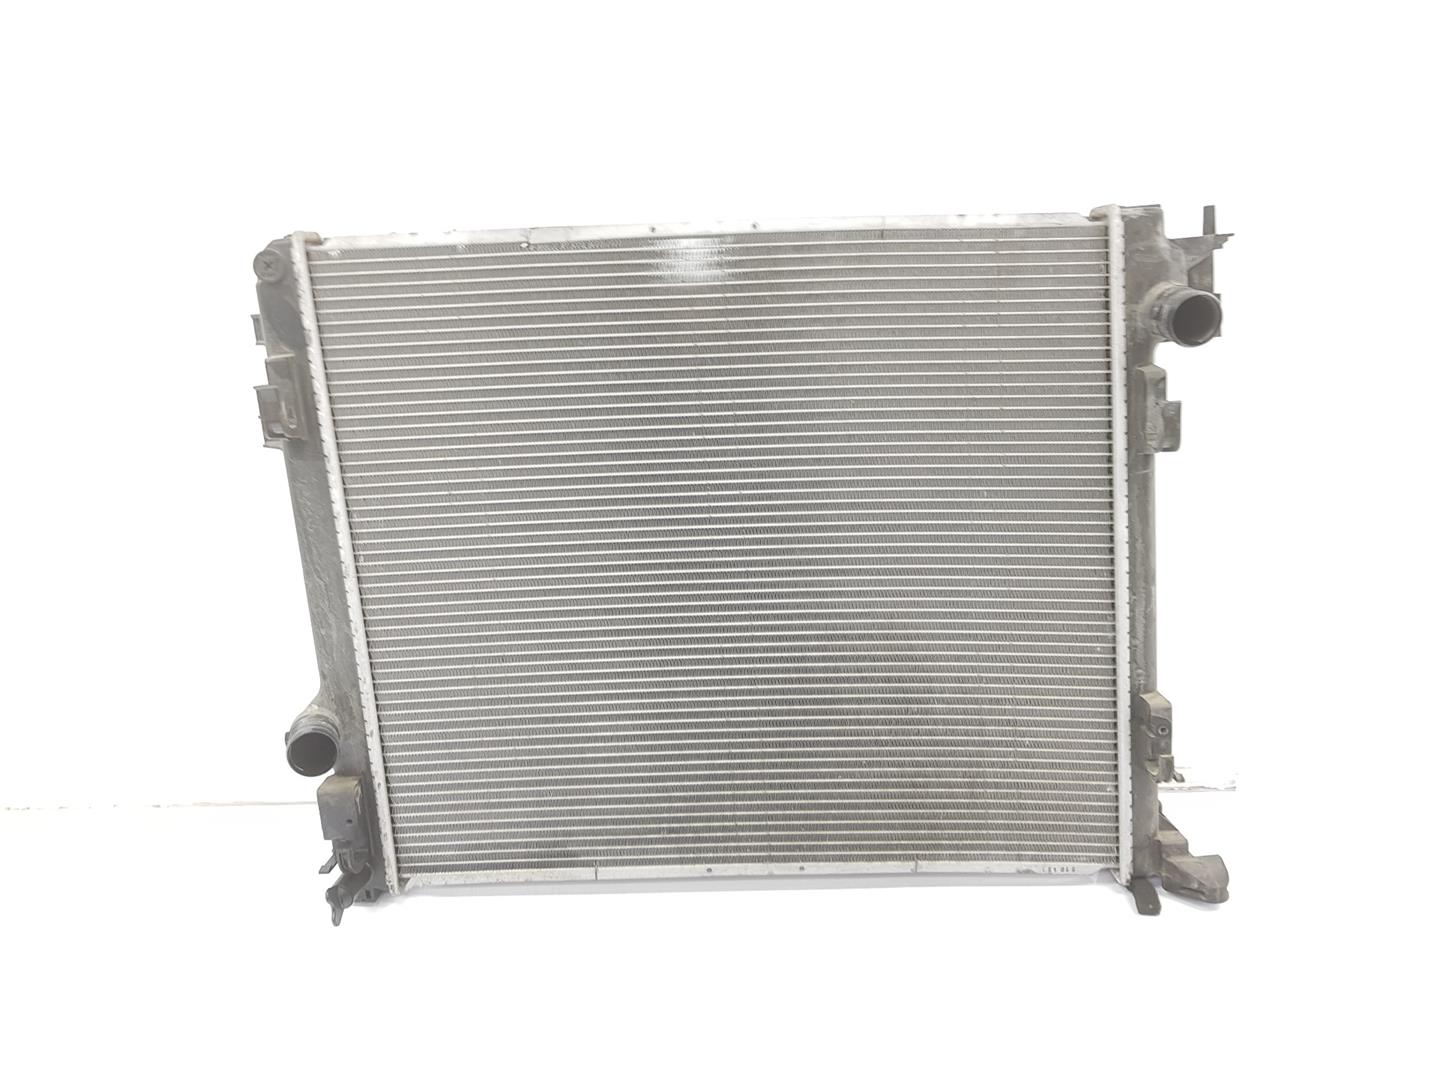 NISSAN X-Trail T32 (2013-2022) Air Con Radiator 214104BE0A, 214104BE0A 23799457